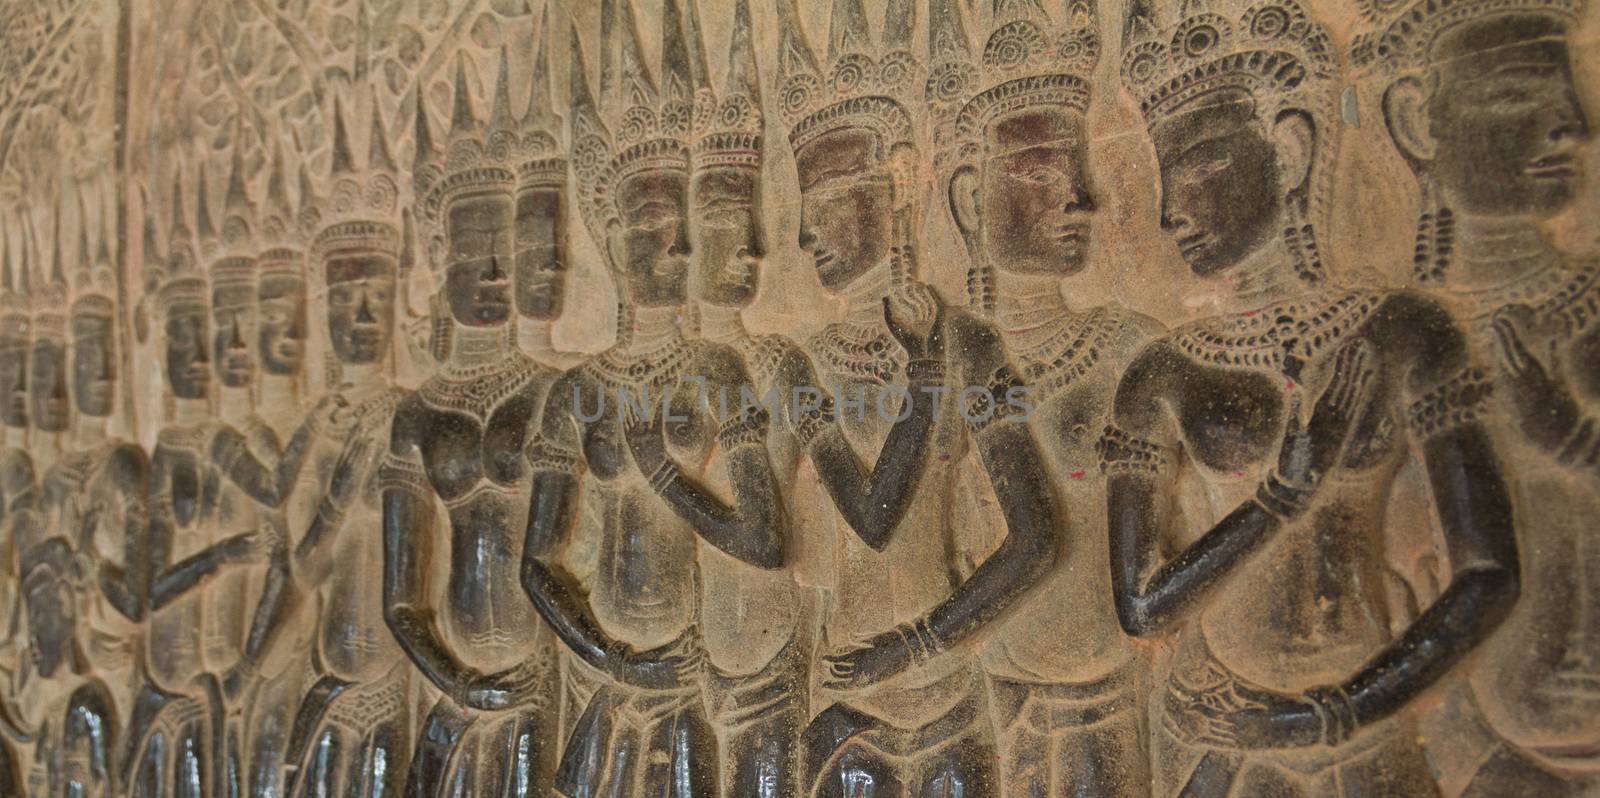 Bas-Relief at Angkor Wat showing a row of Apsaras